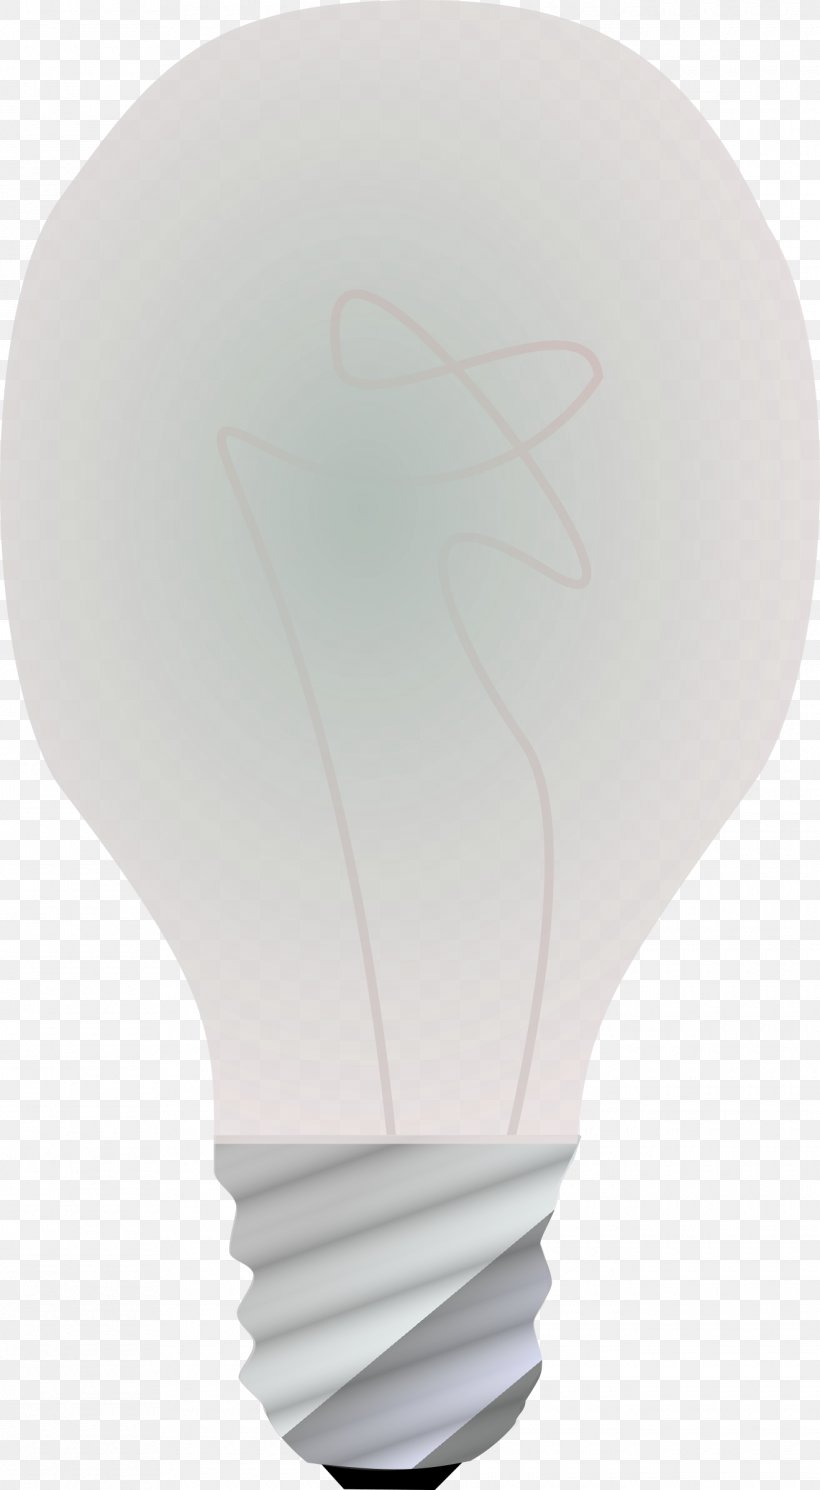 Incandescent Light Bulb Fluorescent Lamp, PNG, 1320x2400px, Light, Building, Electrical Switches, Electricity, Fluorescent Lamp Download Free